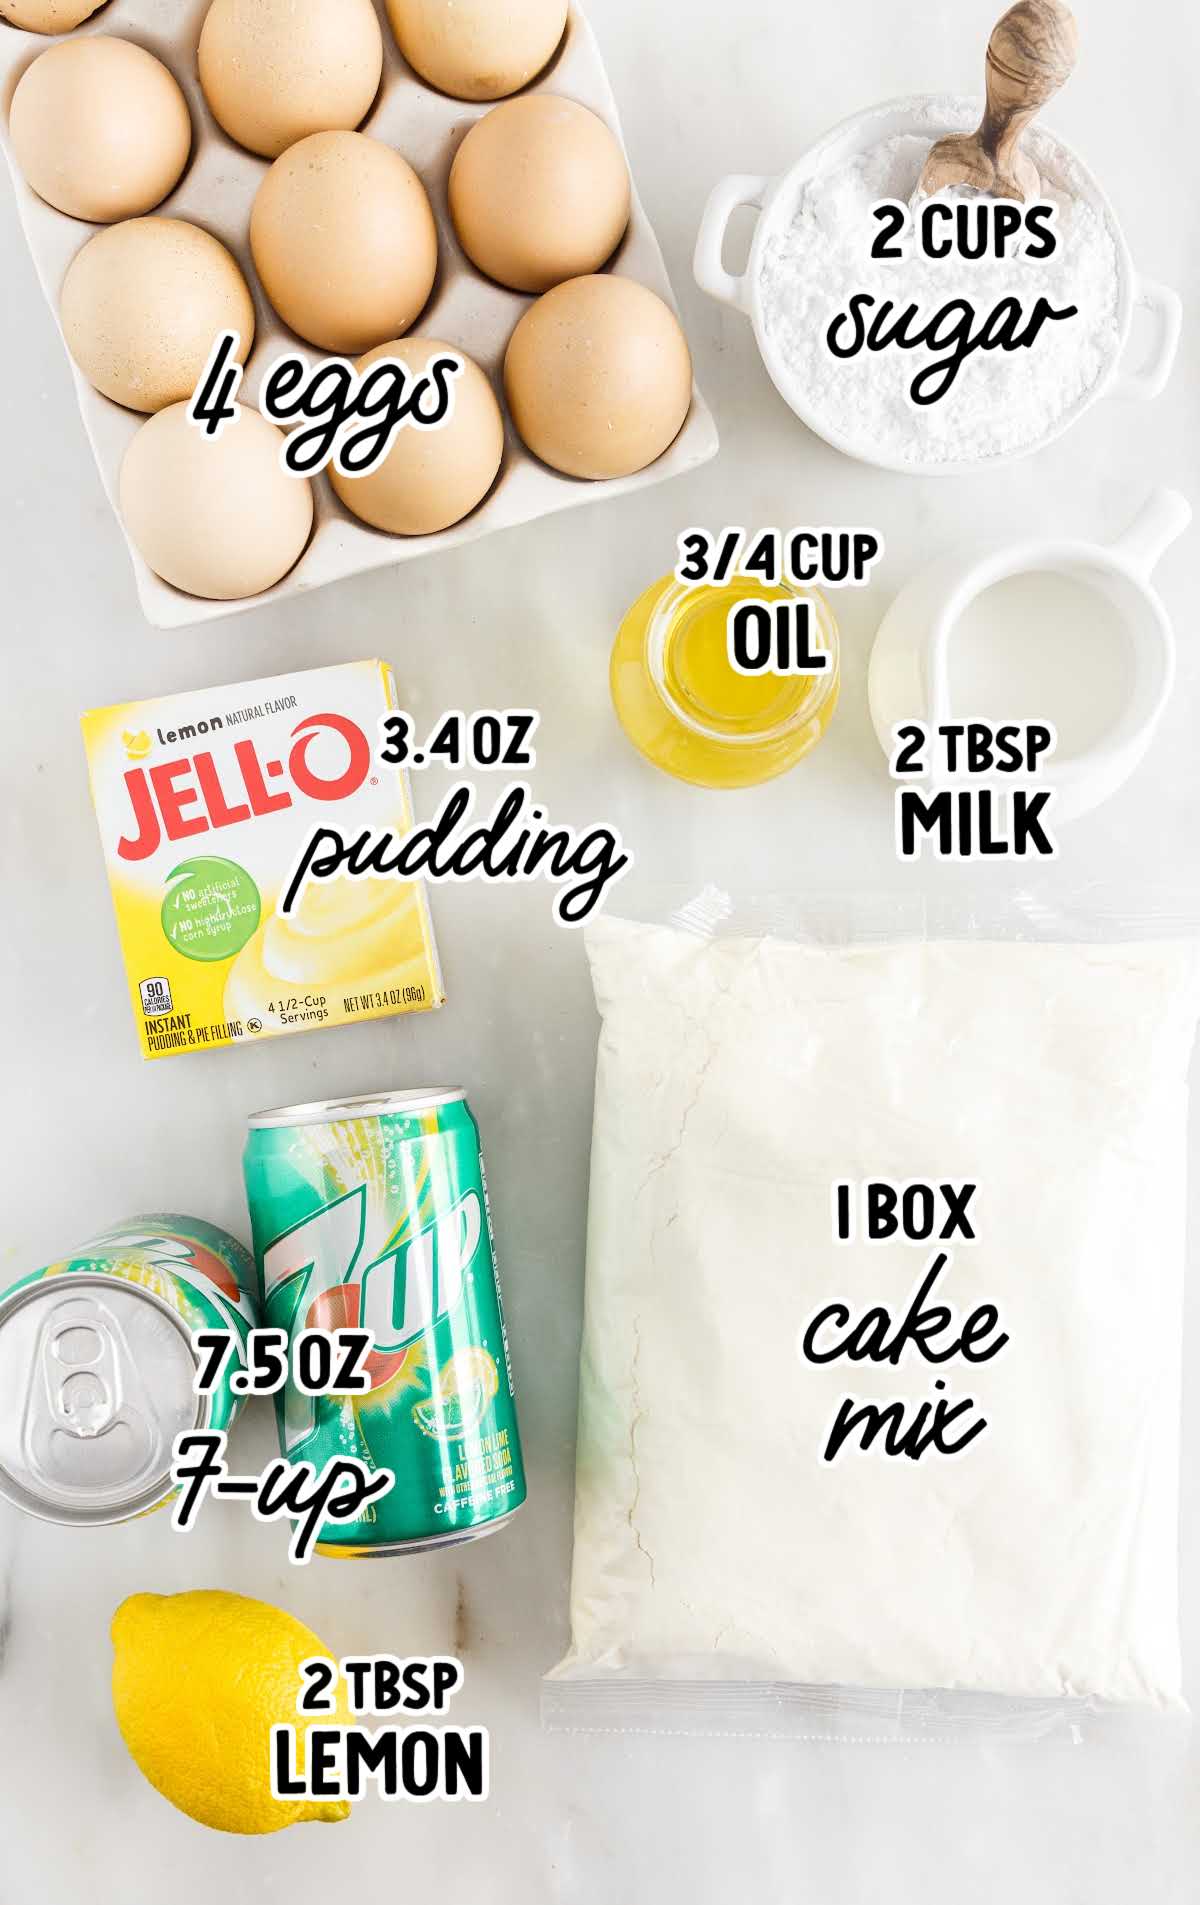 7Up Cake raw ingredients that are labeled